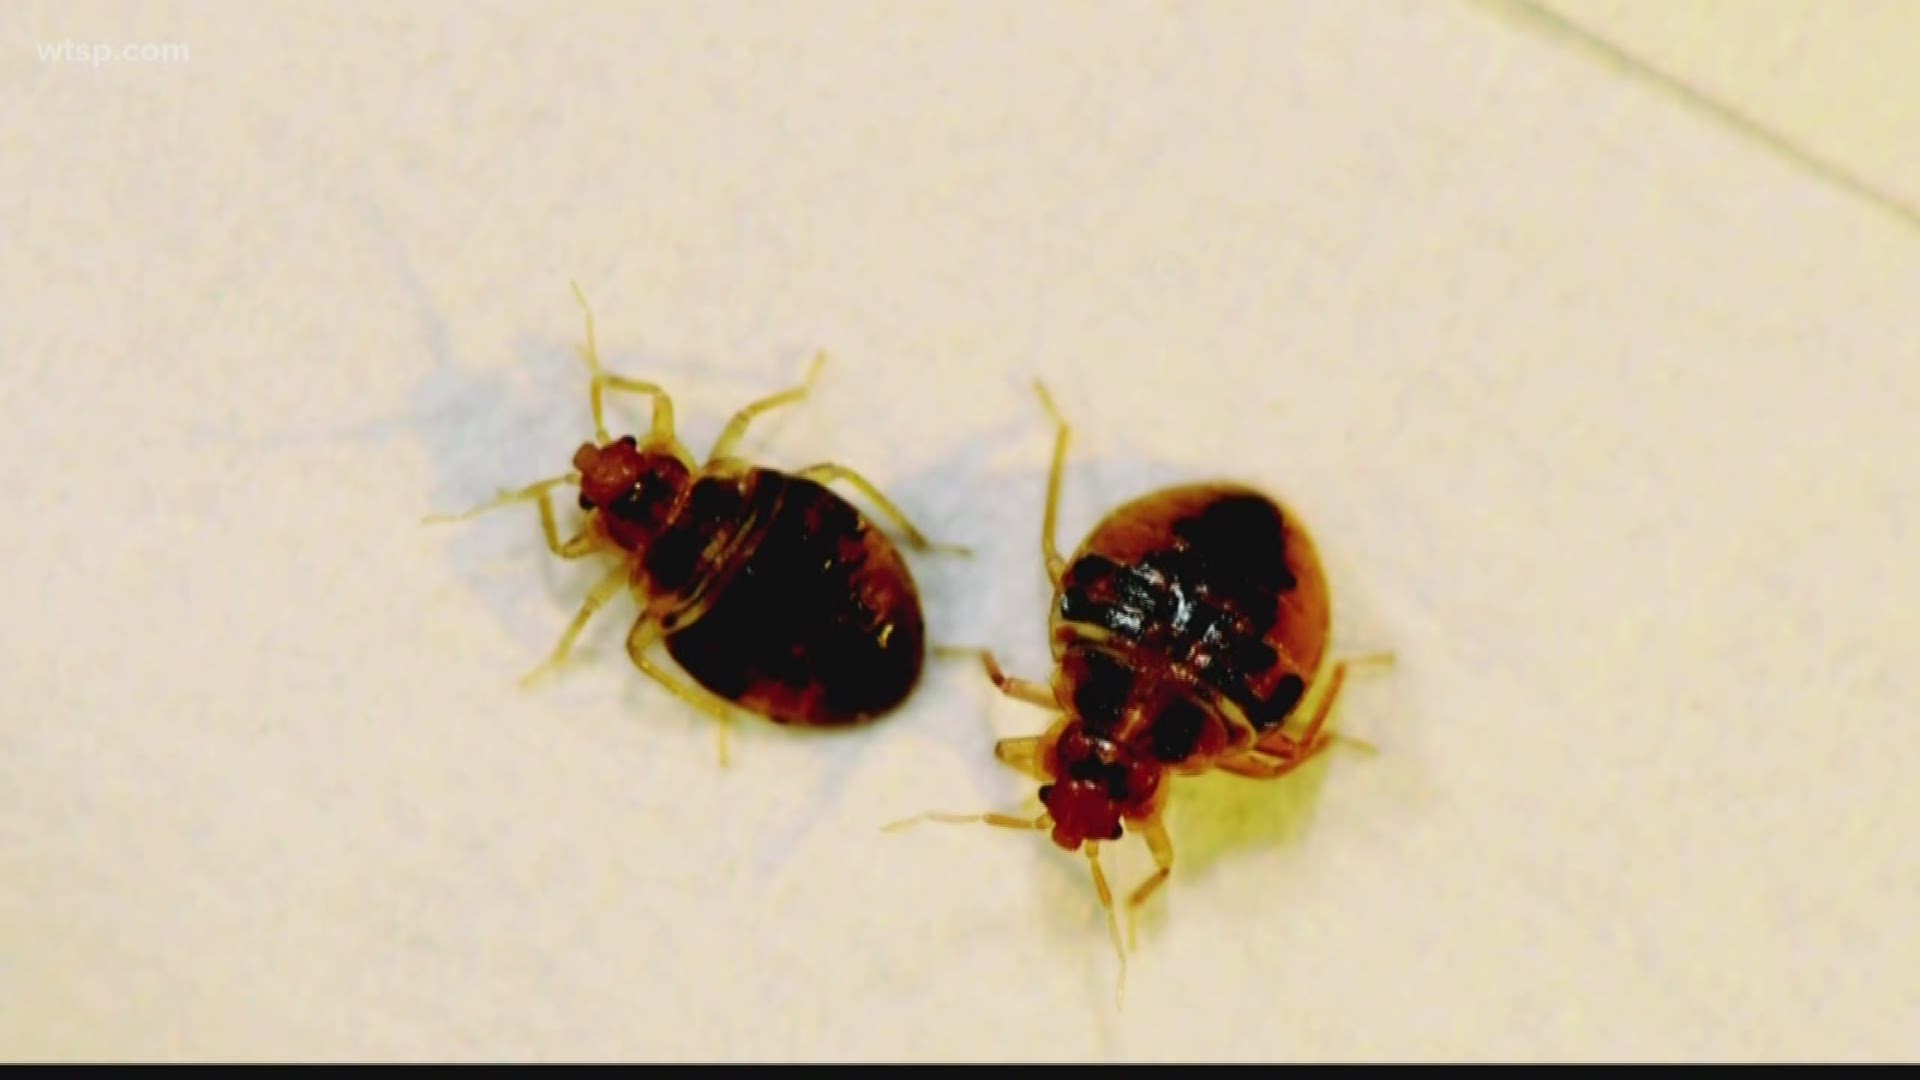 Check for bed bugs before going to sleep.